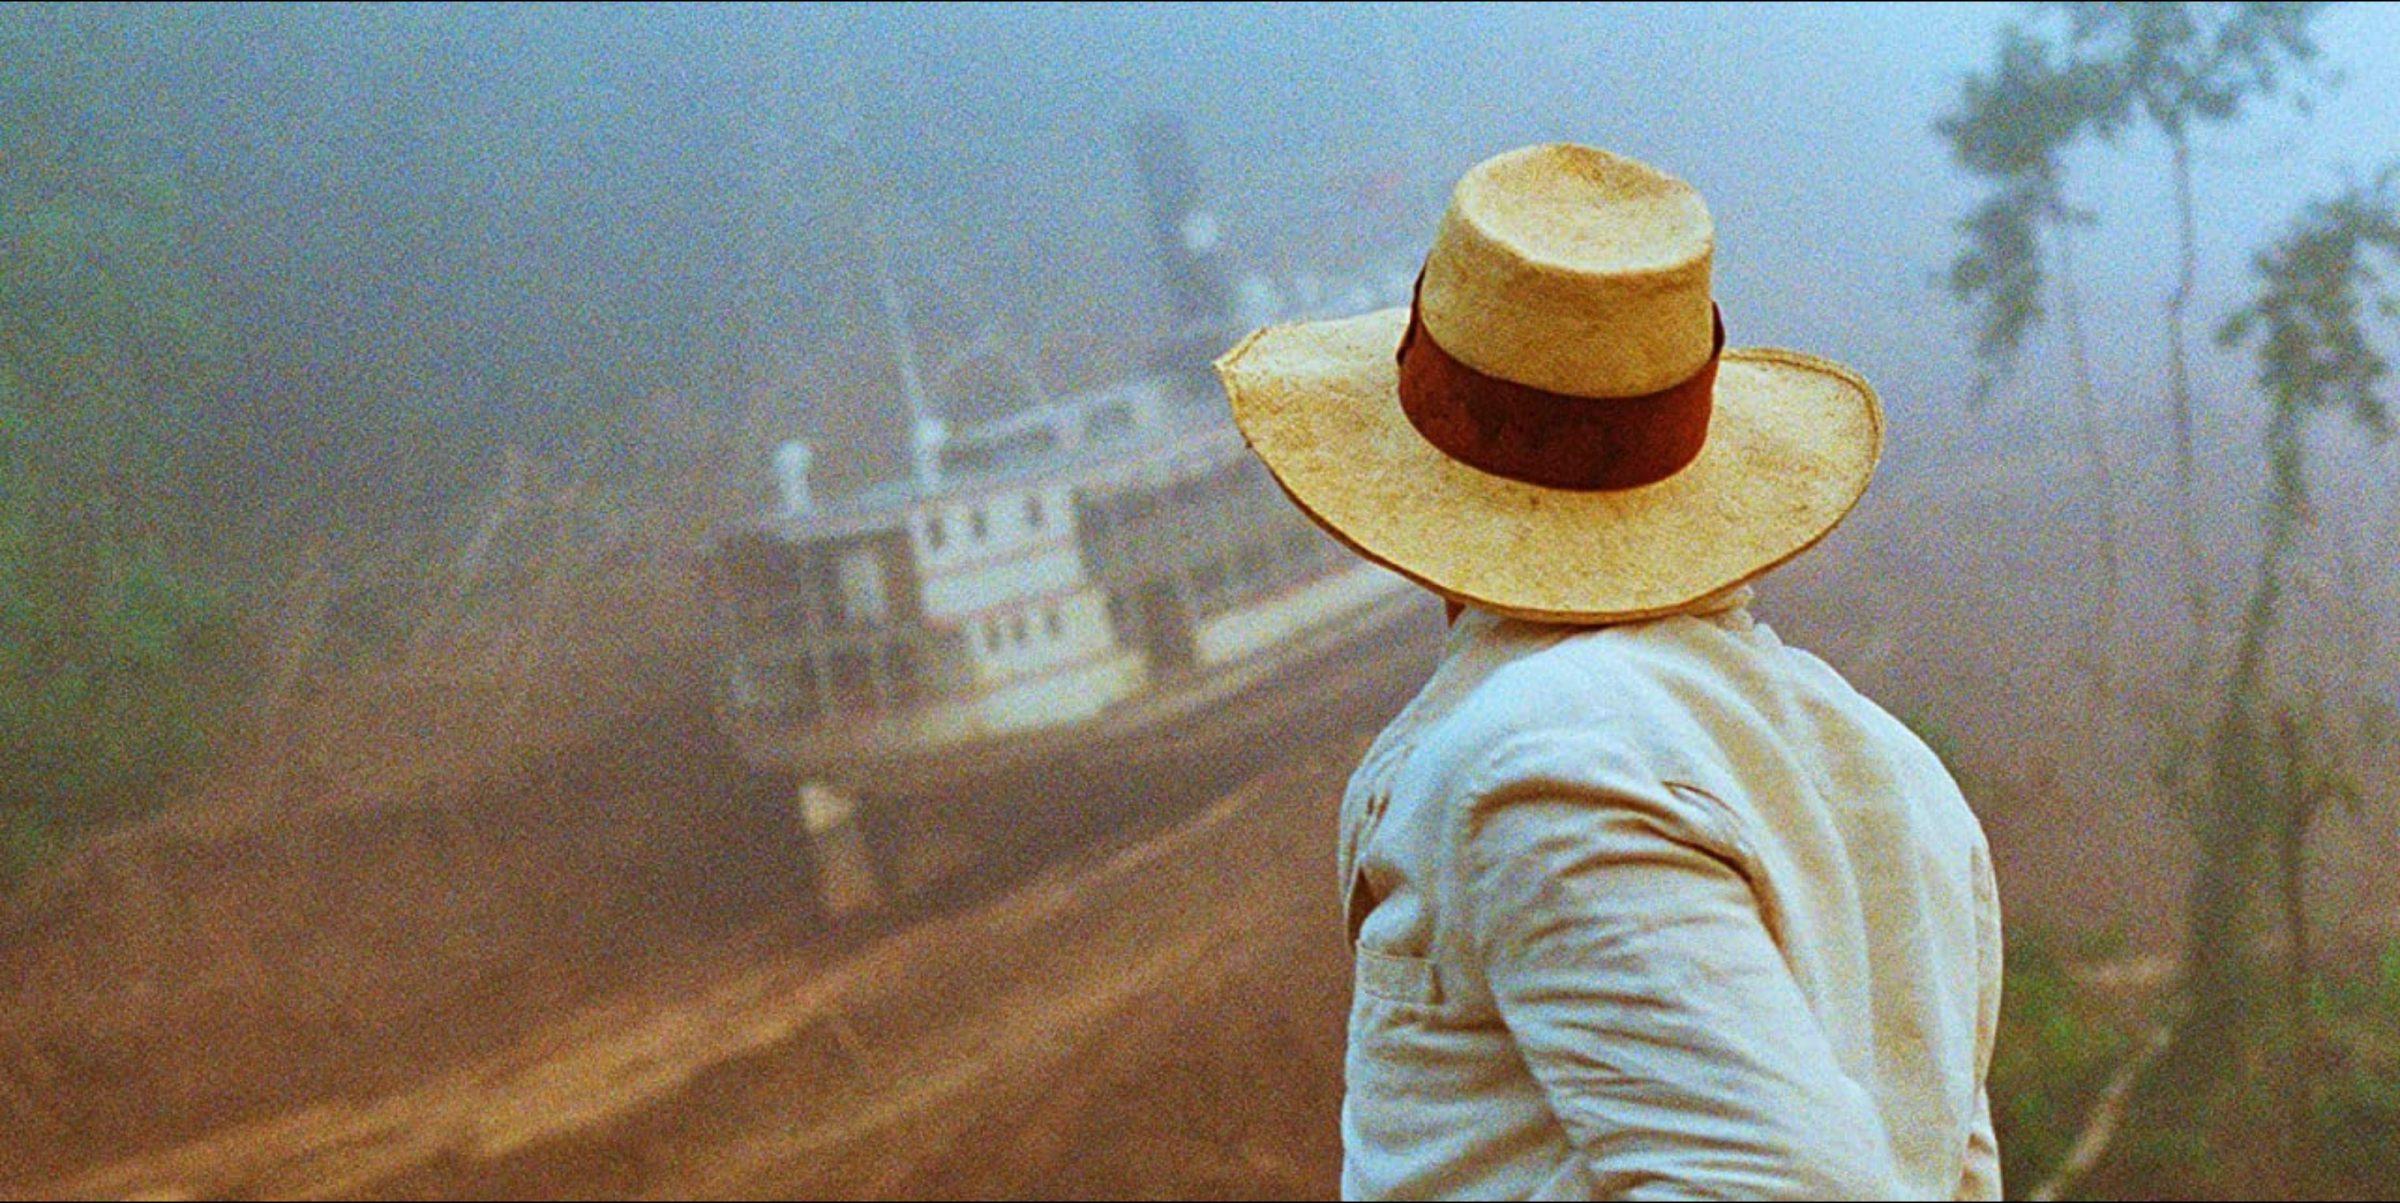 Production still of the film Fitzcarraldo by Werner Herzog. A man watch a huge boat being dragged up a mountain.